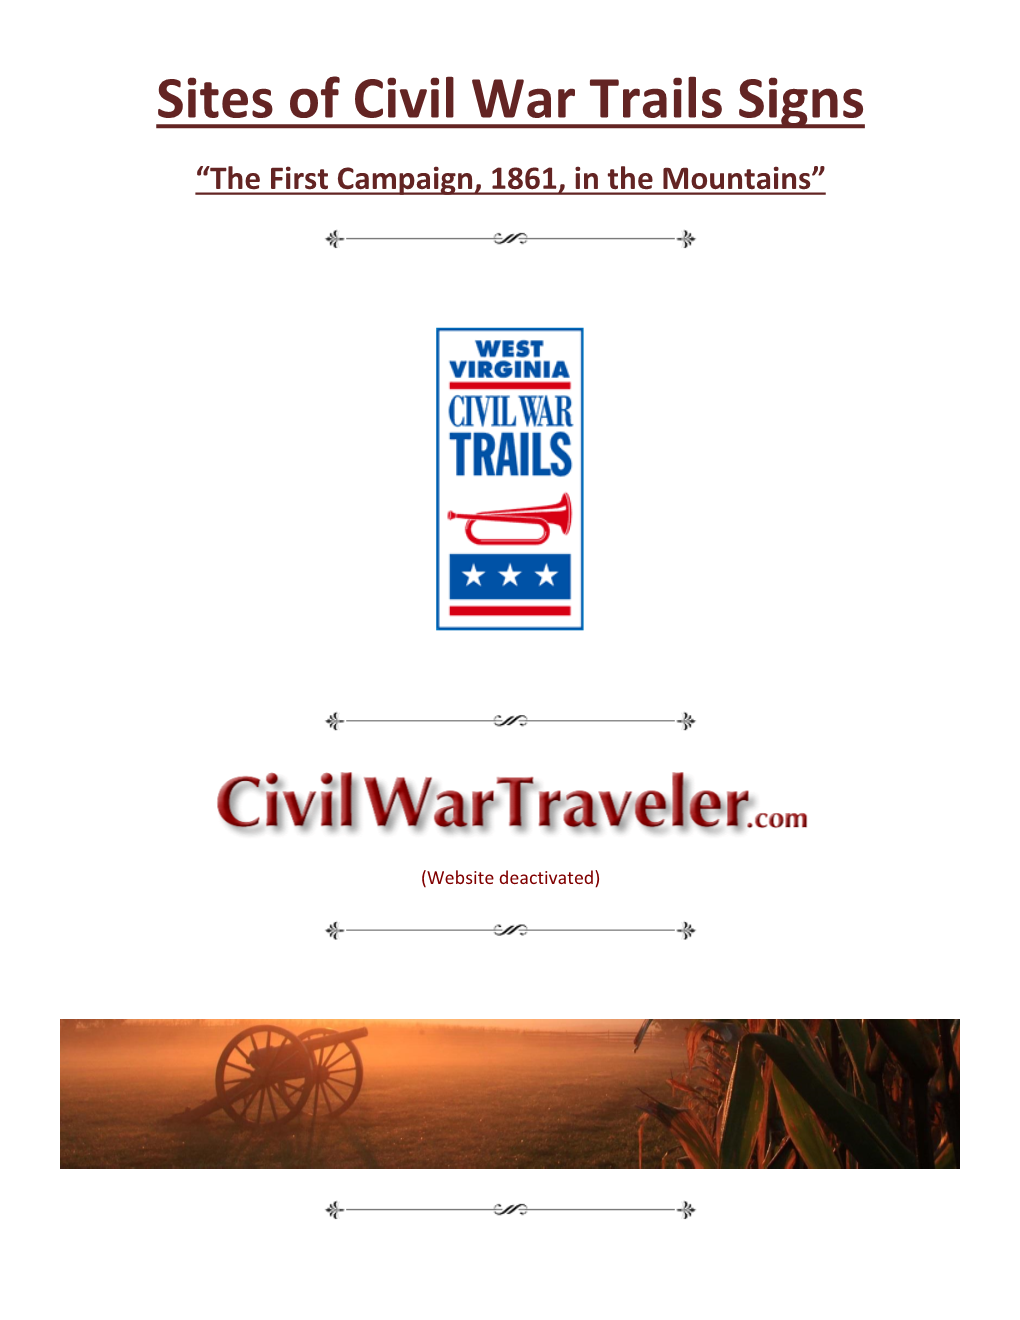 Sites of Civil War Trails Signs “The First Campaign, 1861, in the Mountains”